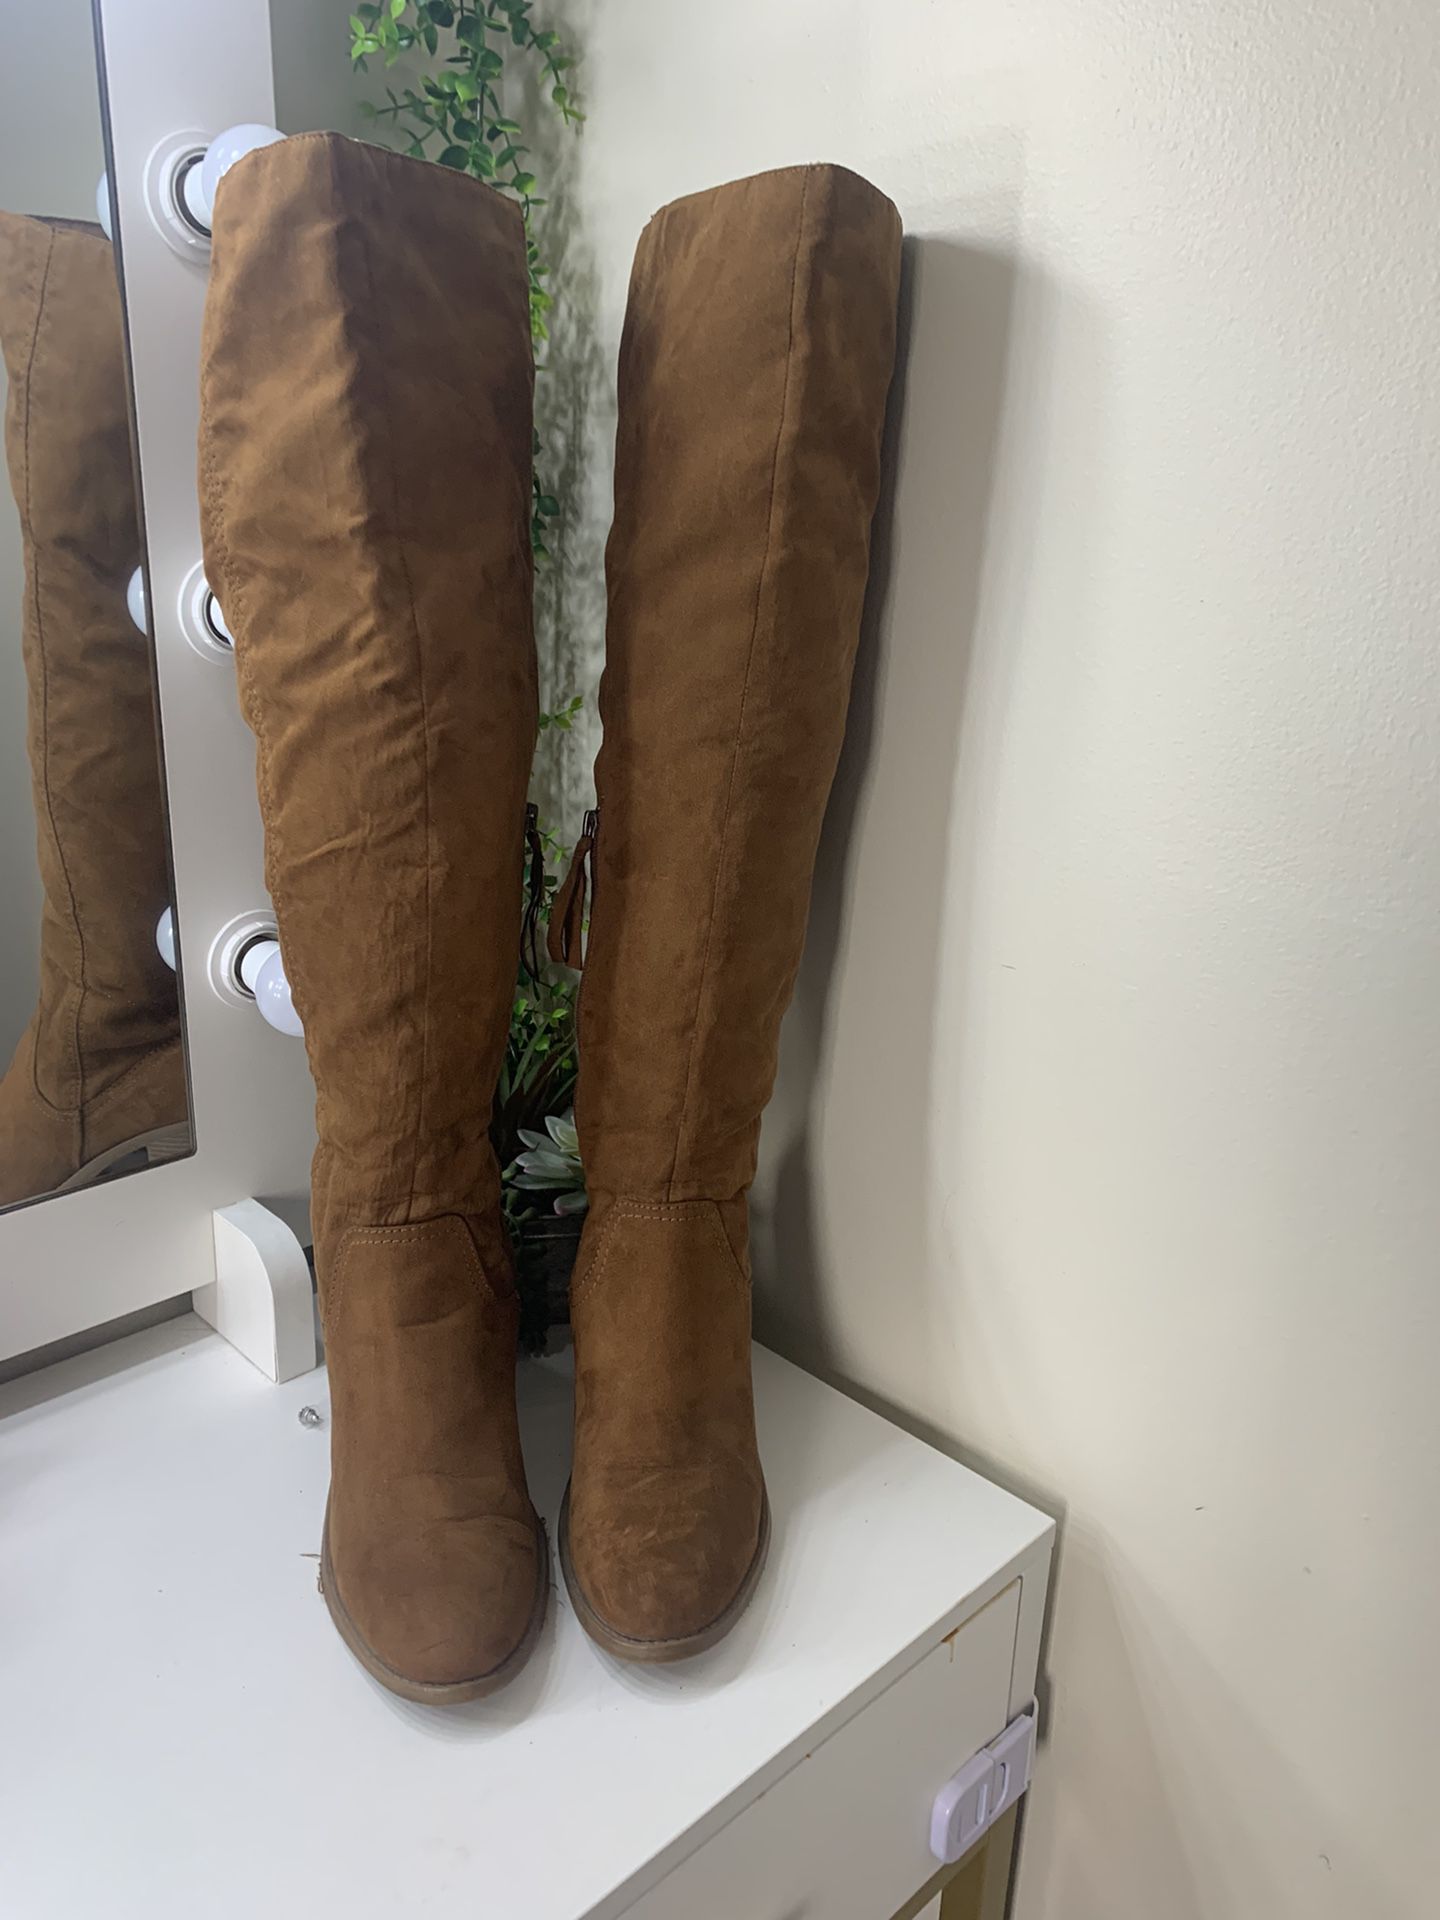 Thigh high boots size 11 